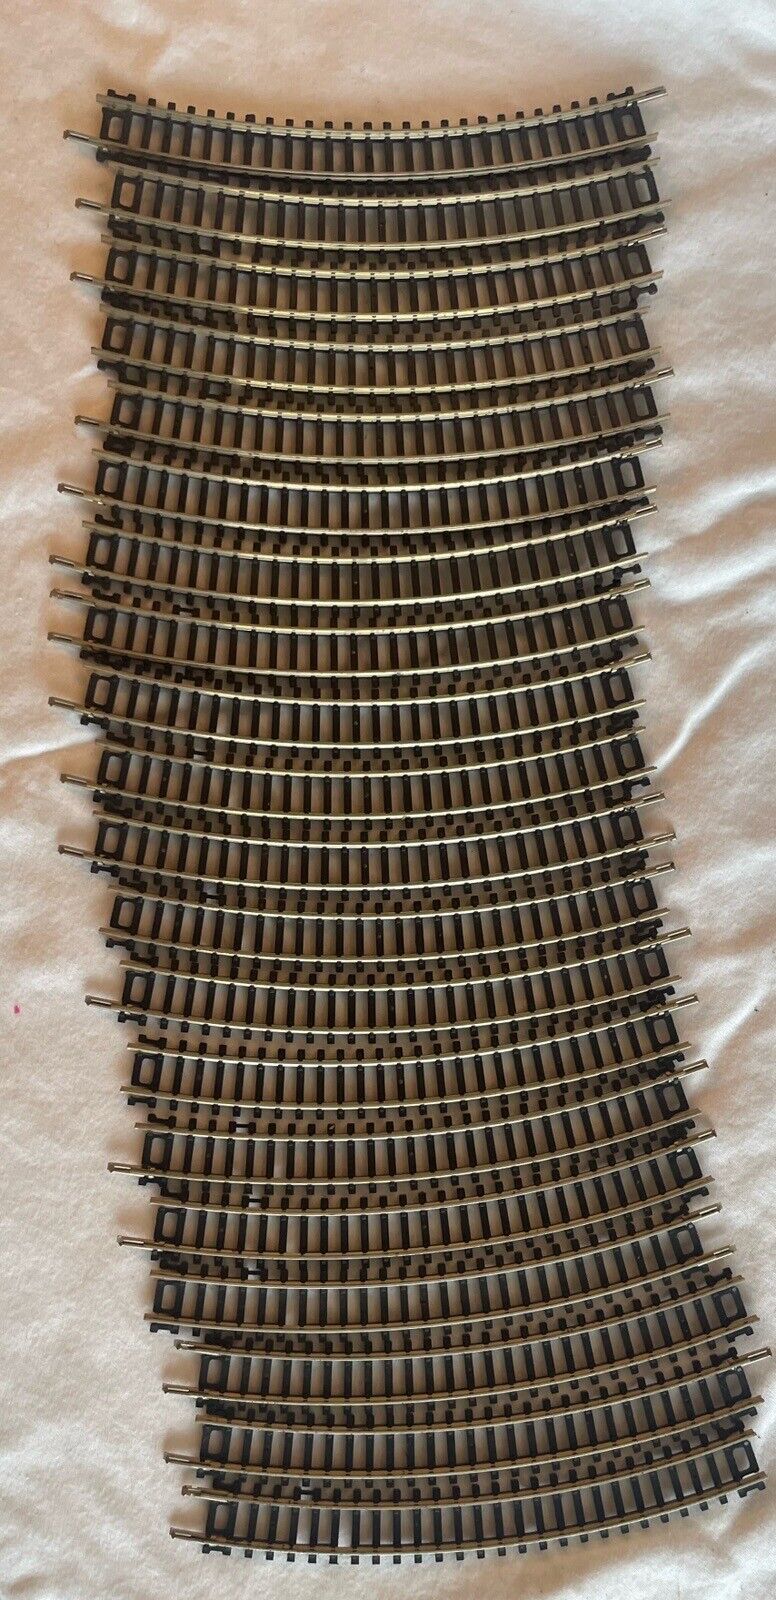 N Scale Model Power / GT 9 3/4 in radius 20 pieces Curved Track C-6 VG Condition